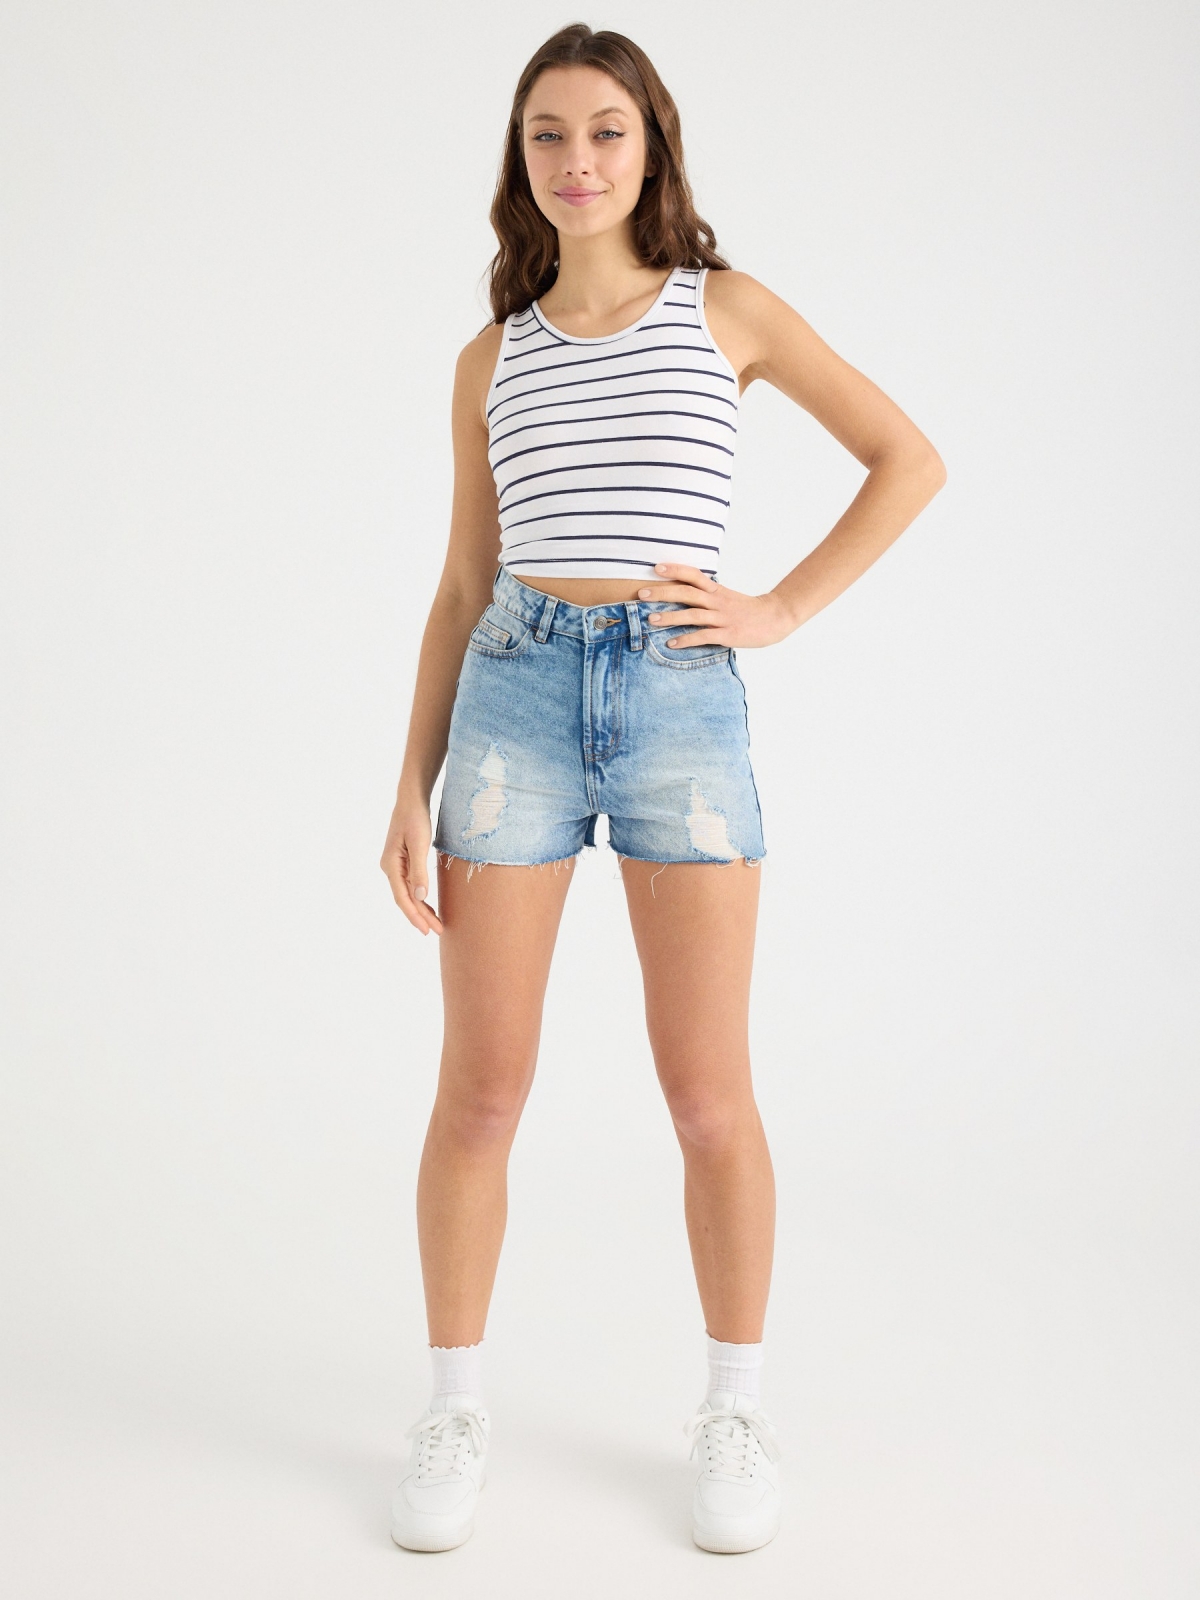 Striped cropped tank t-shirt white front view